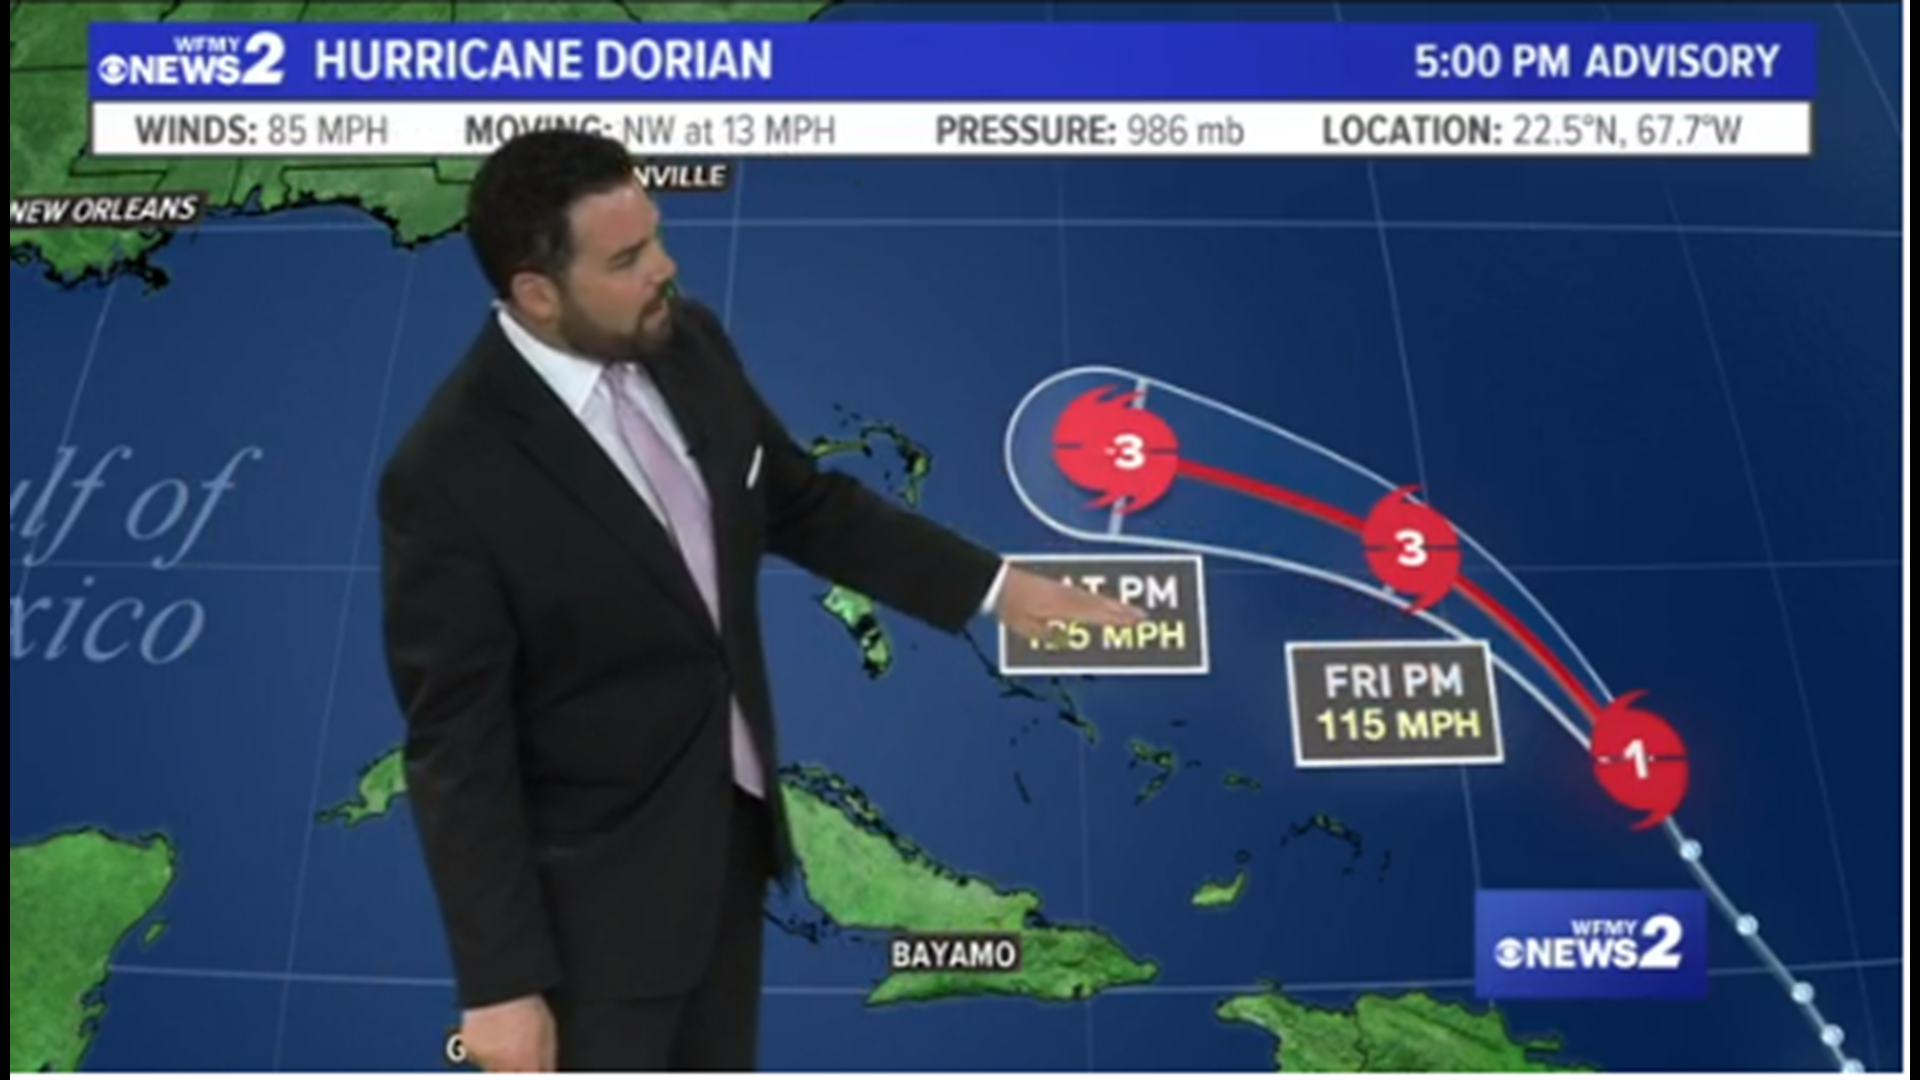 Hurricane Dorian continues to intensify as it heads towards the U.S. Meteorologist Tim Buckley talks about its latest track and possible impacts for North Carolina.